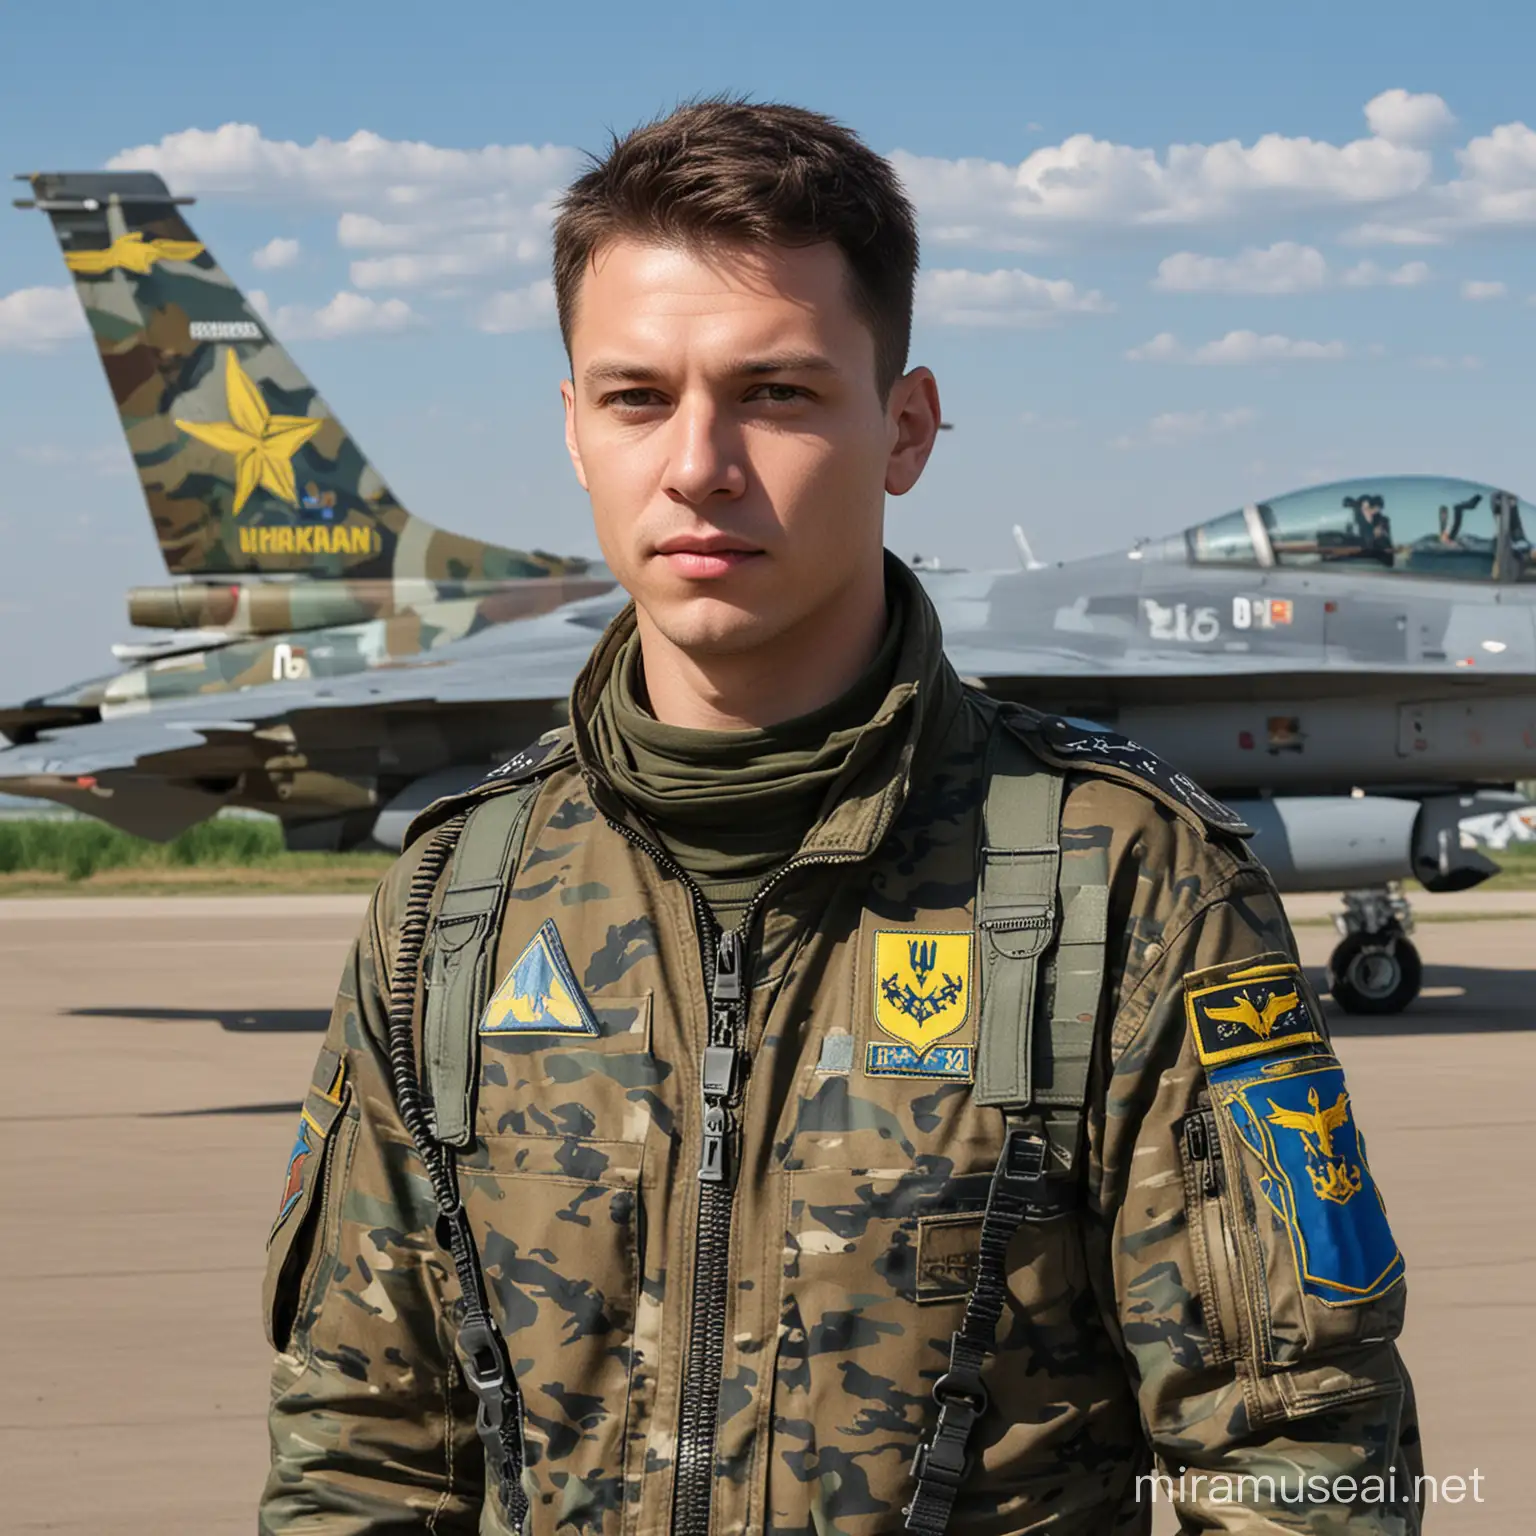 A pilot with Ukrainian symbols in a camouflage uniform and an F-16 aircraft